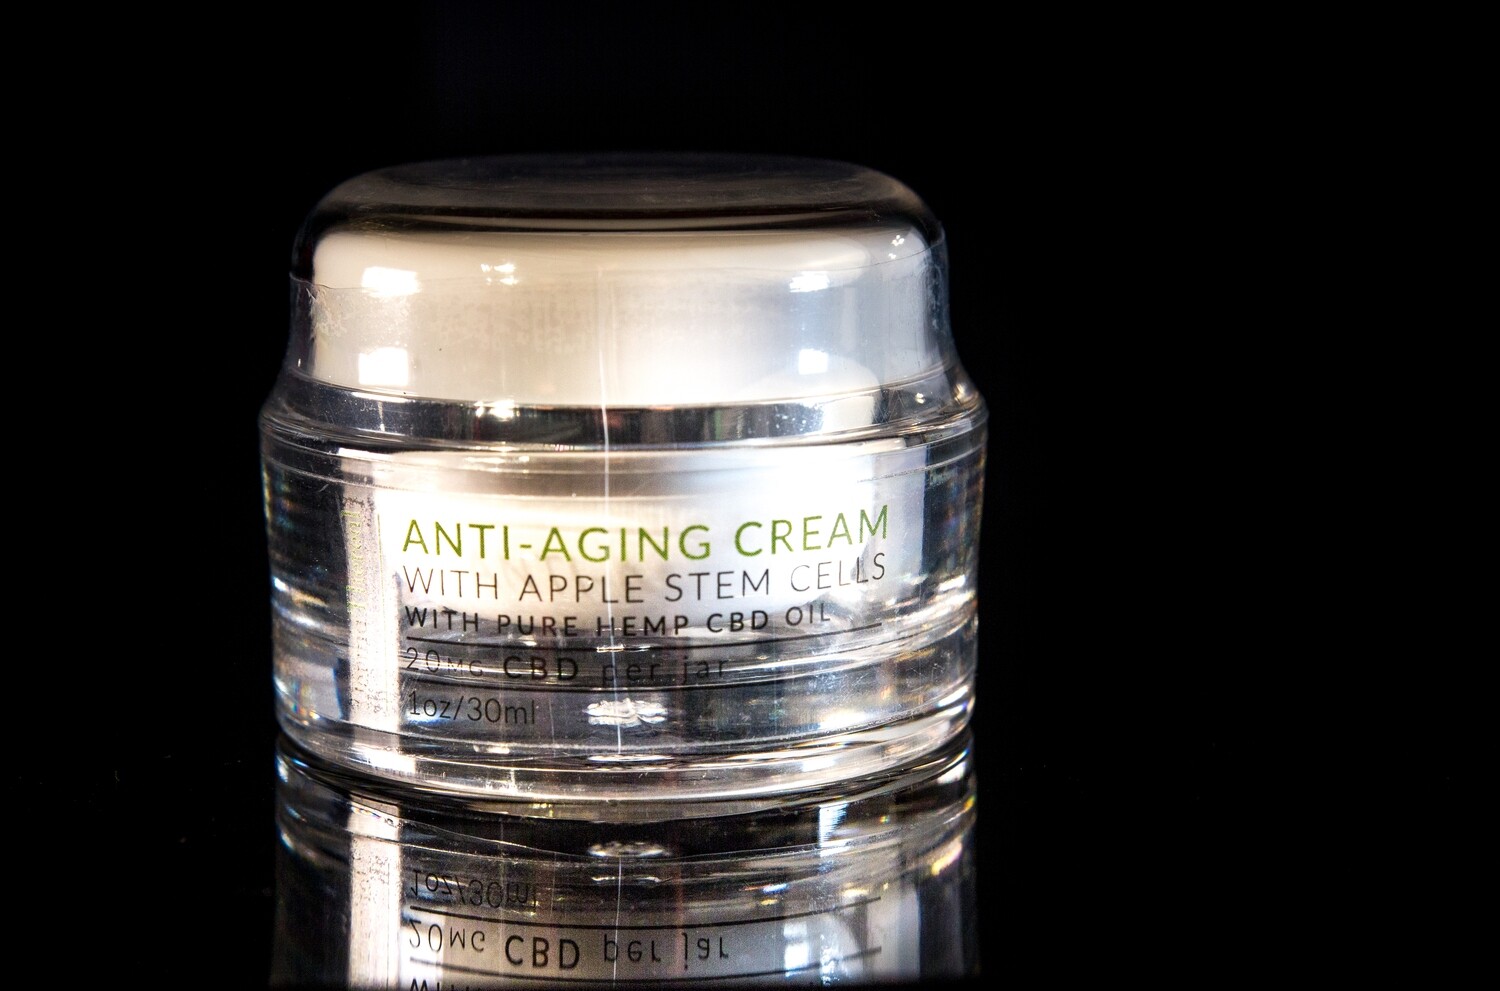 Derma Thereal - Anti Aging Cream with Apple stem cells